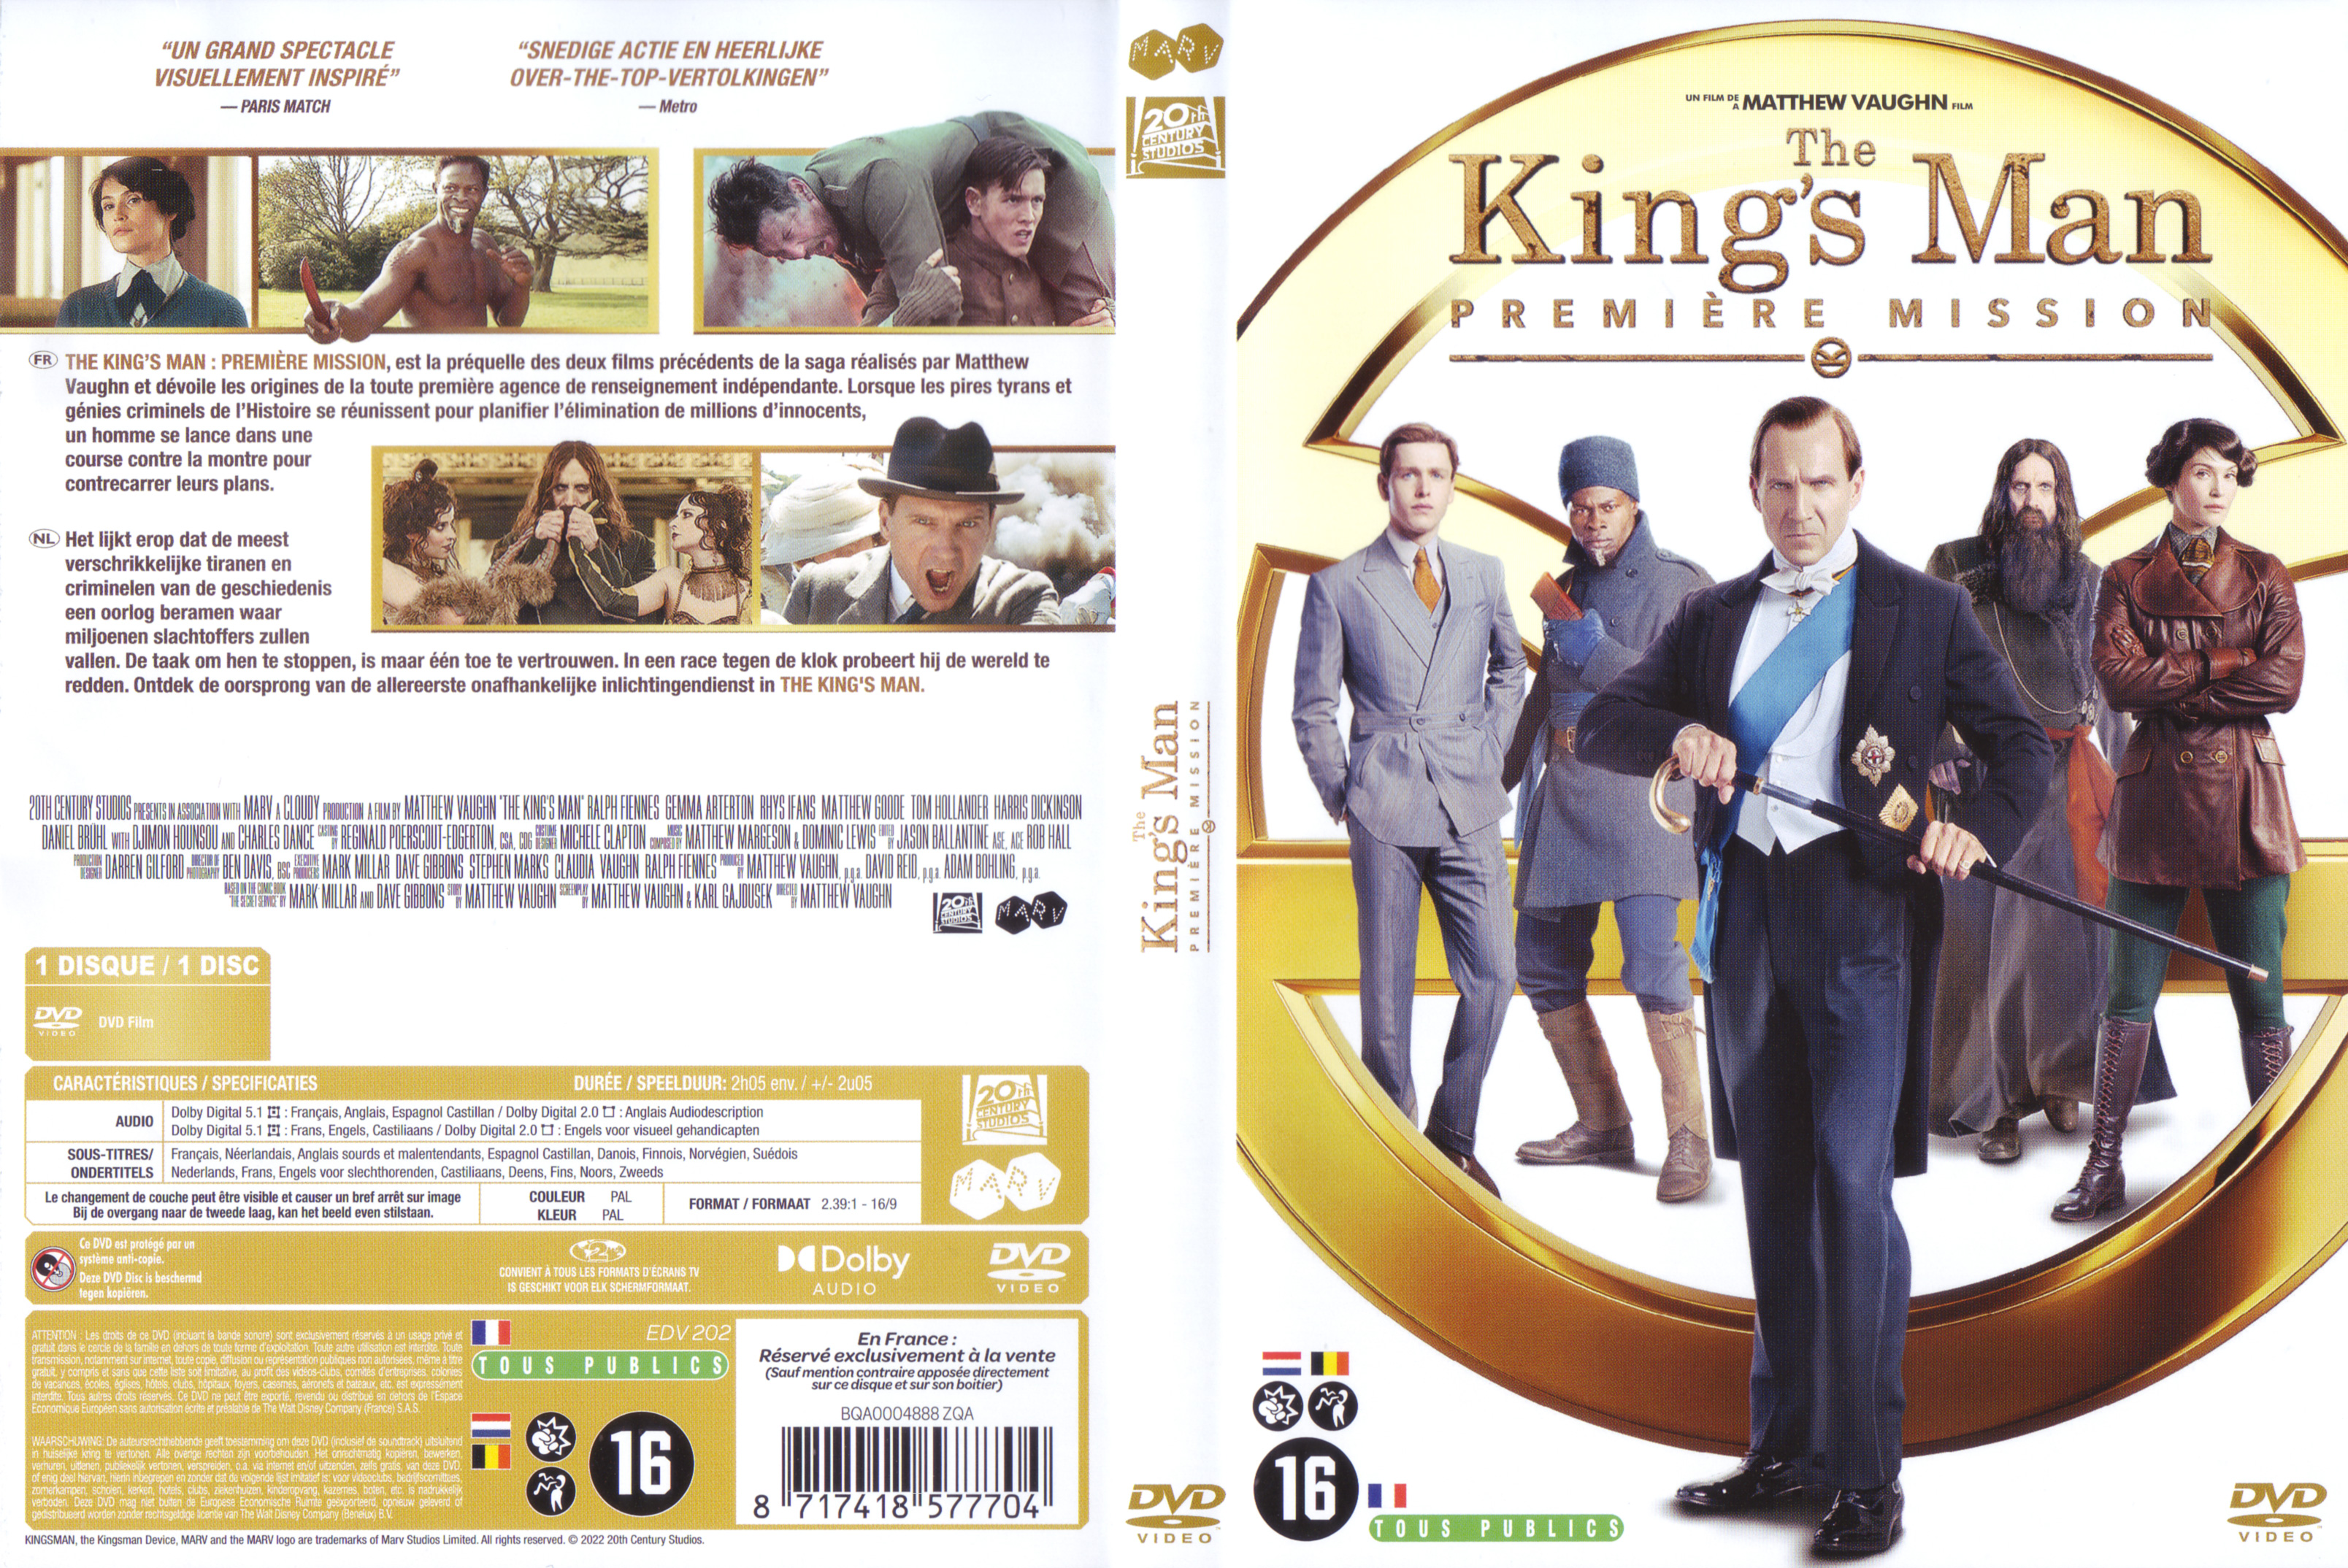 Jaquette DVD The King